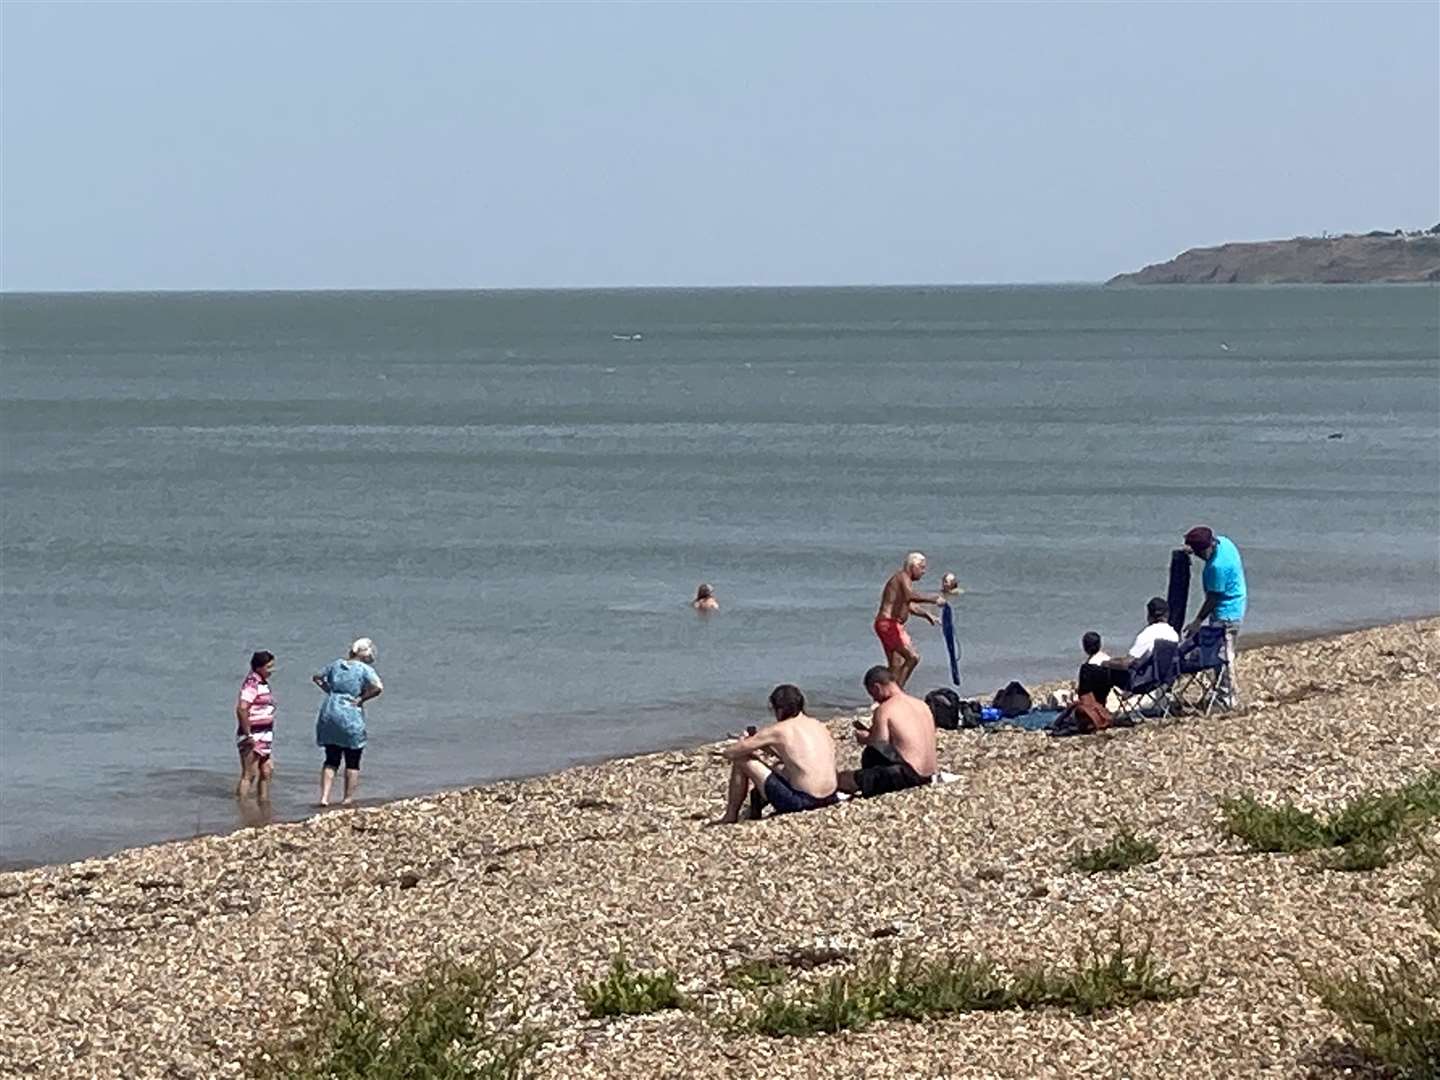 Swimmers take a dip to cool off at the beach at Minster on the sun-kissed Isle of Sheppey on the hottest day of the year so far